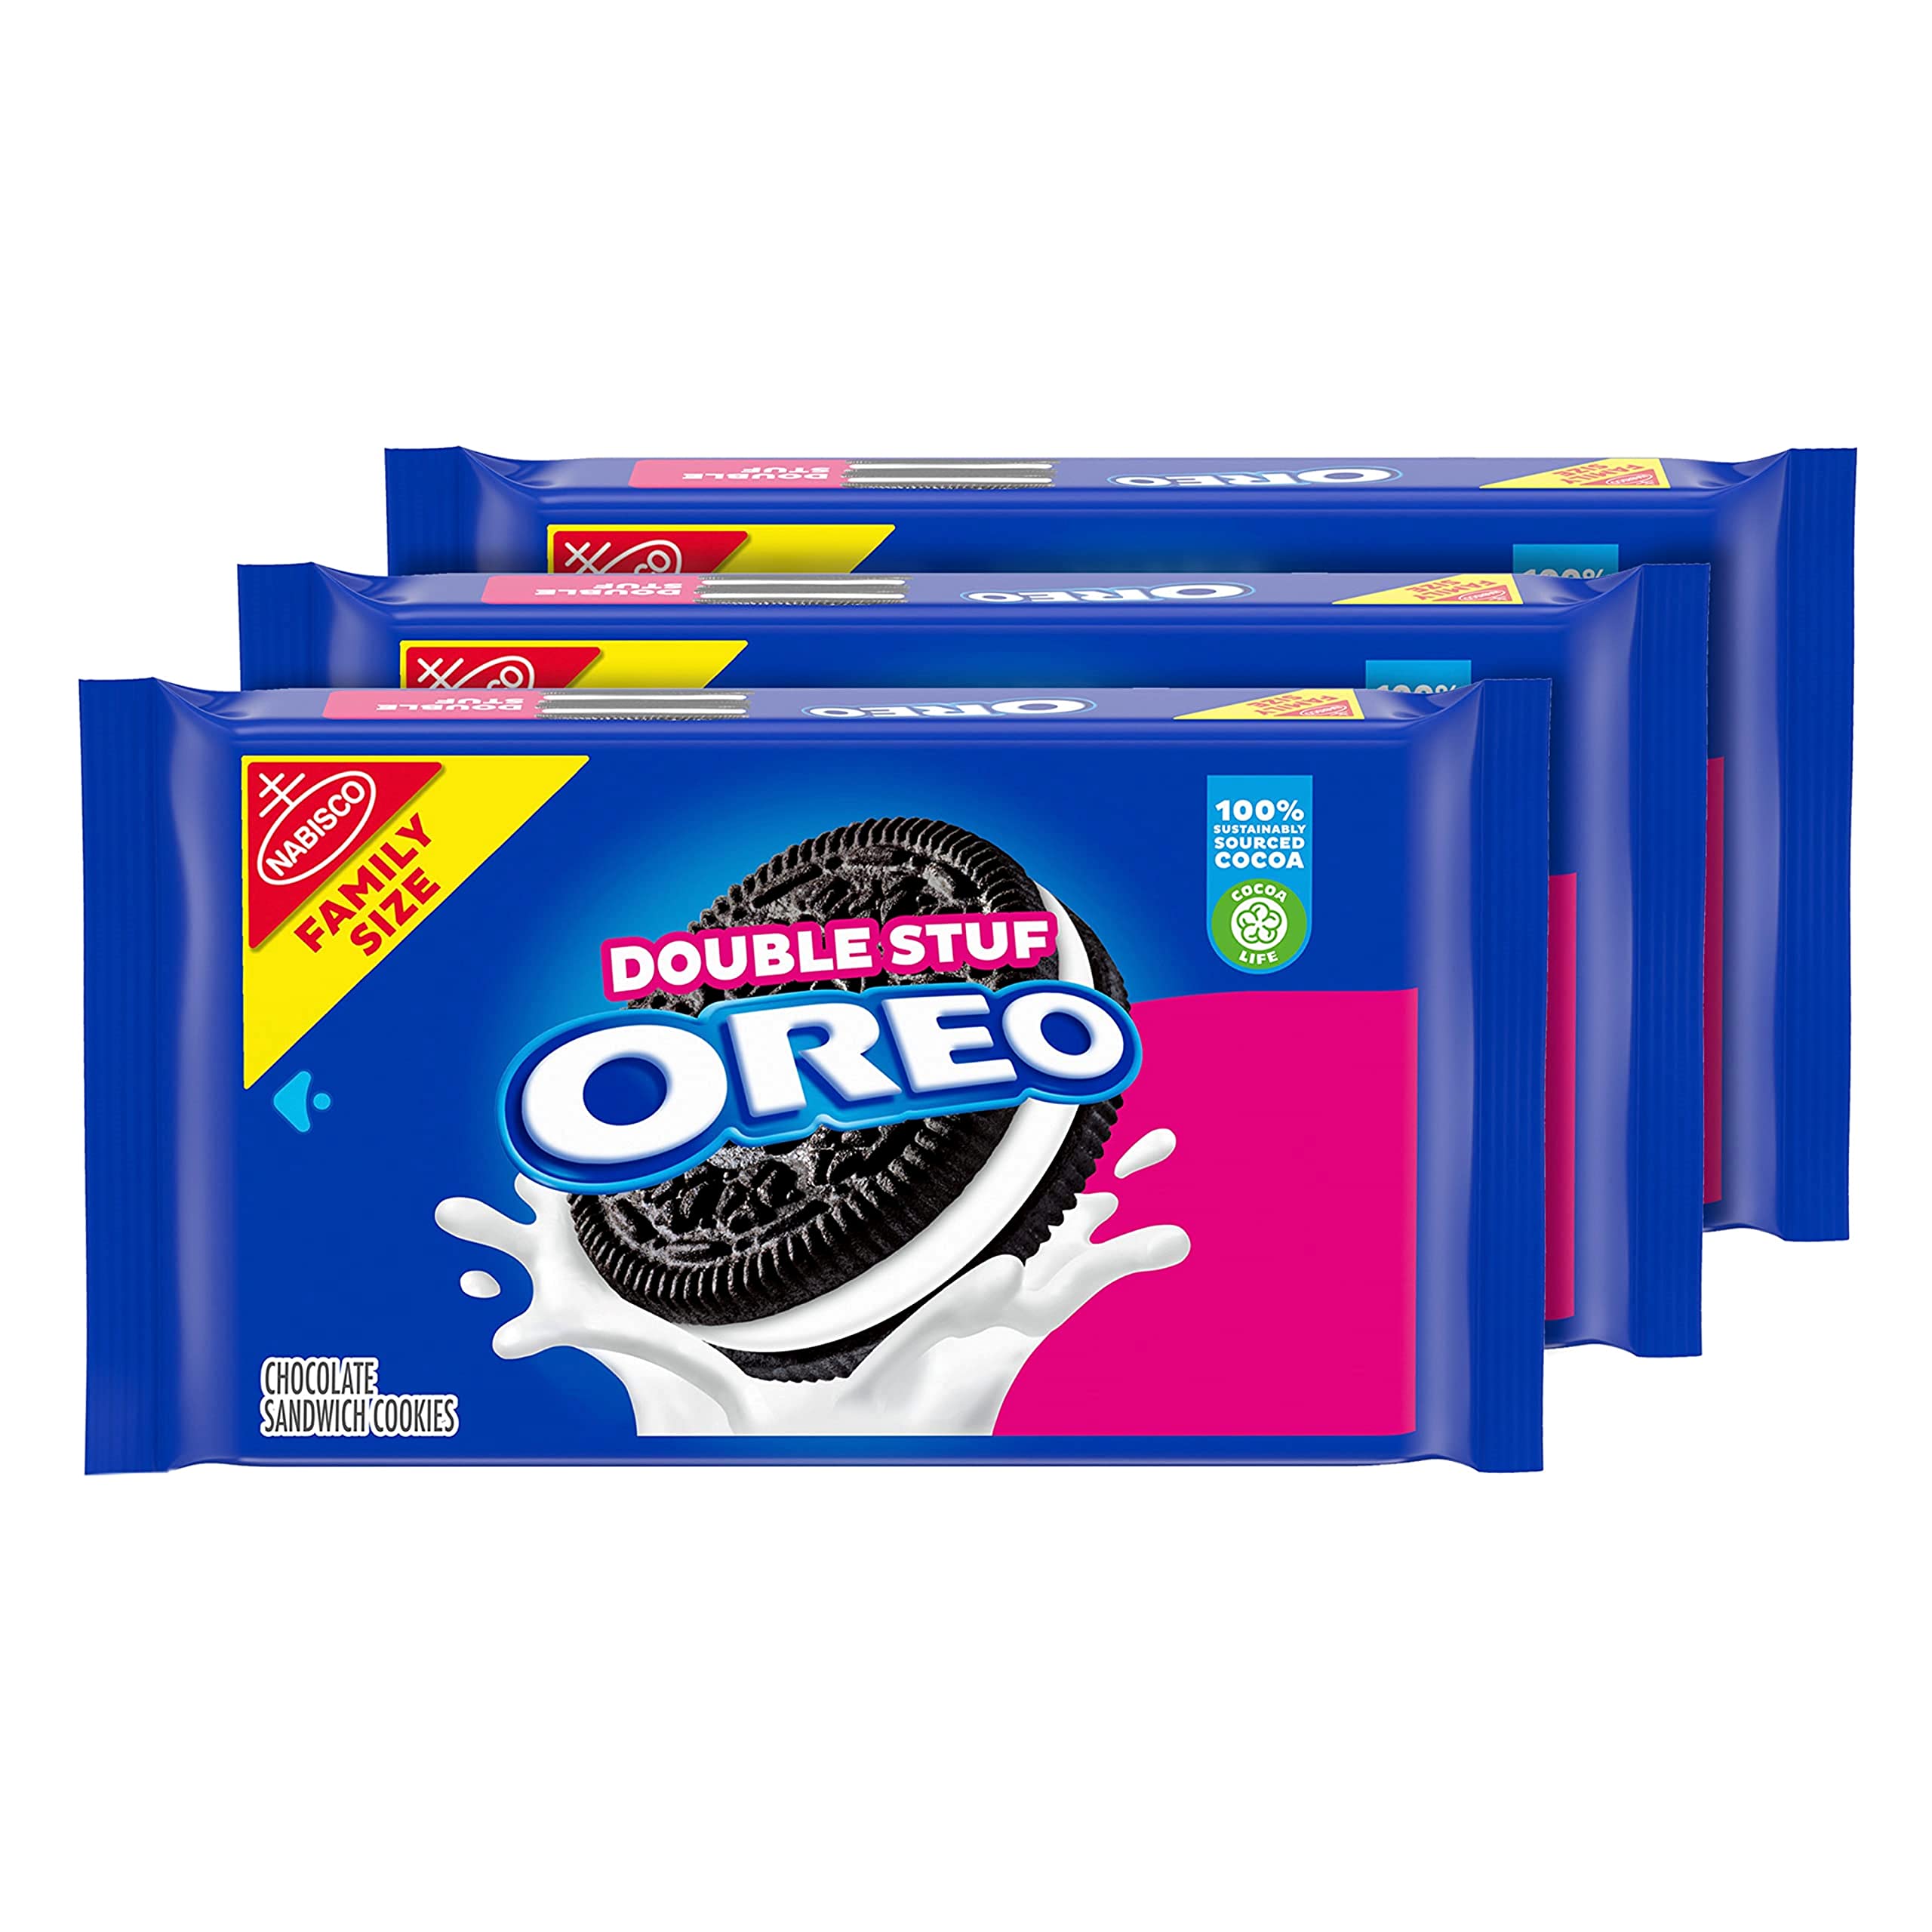 $9.64 /w S&S: 3-Count 20-Oz Oreo Family Size Double Stuff Chocolate Sandwich Cookies